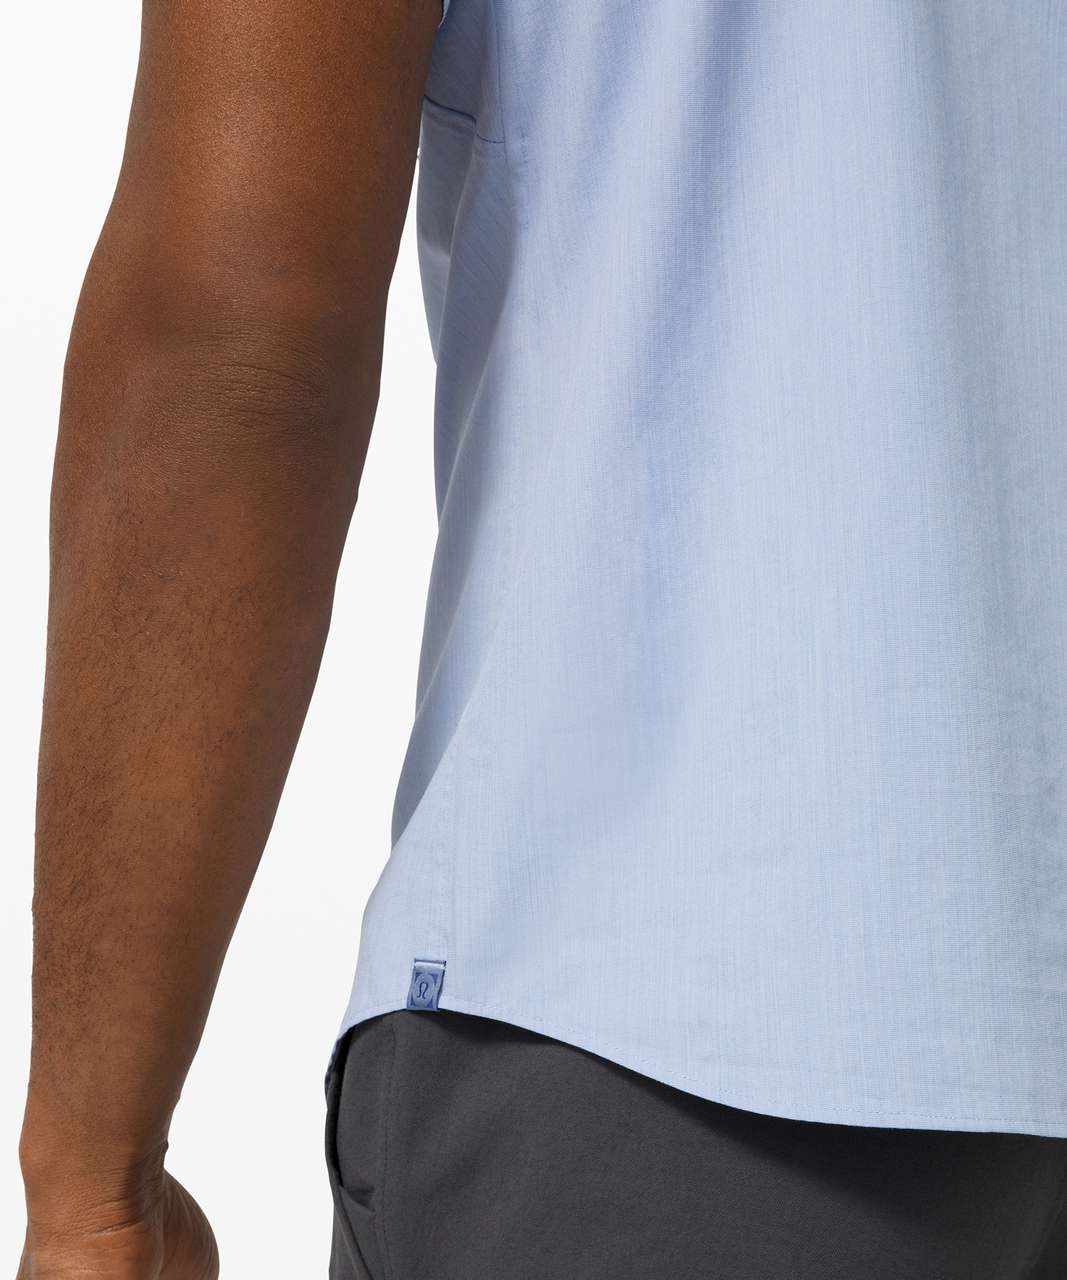 Lululemon Down to the Wire Slim Fit Short Sleeve - Heathered Oasis Blue